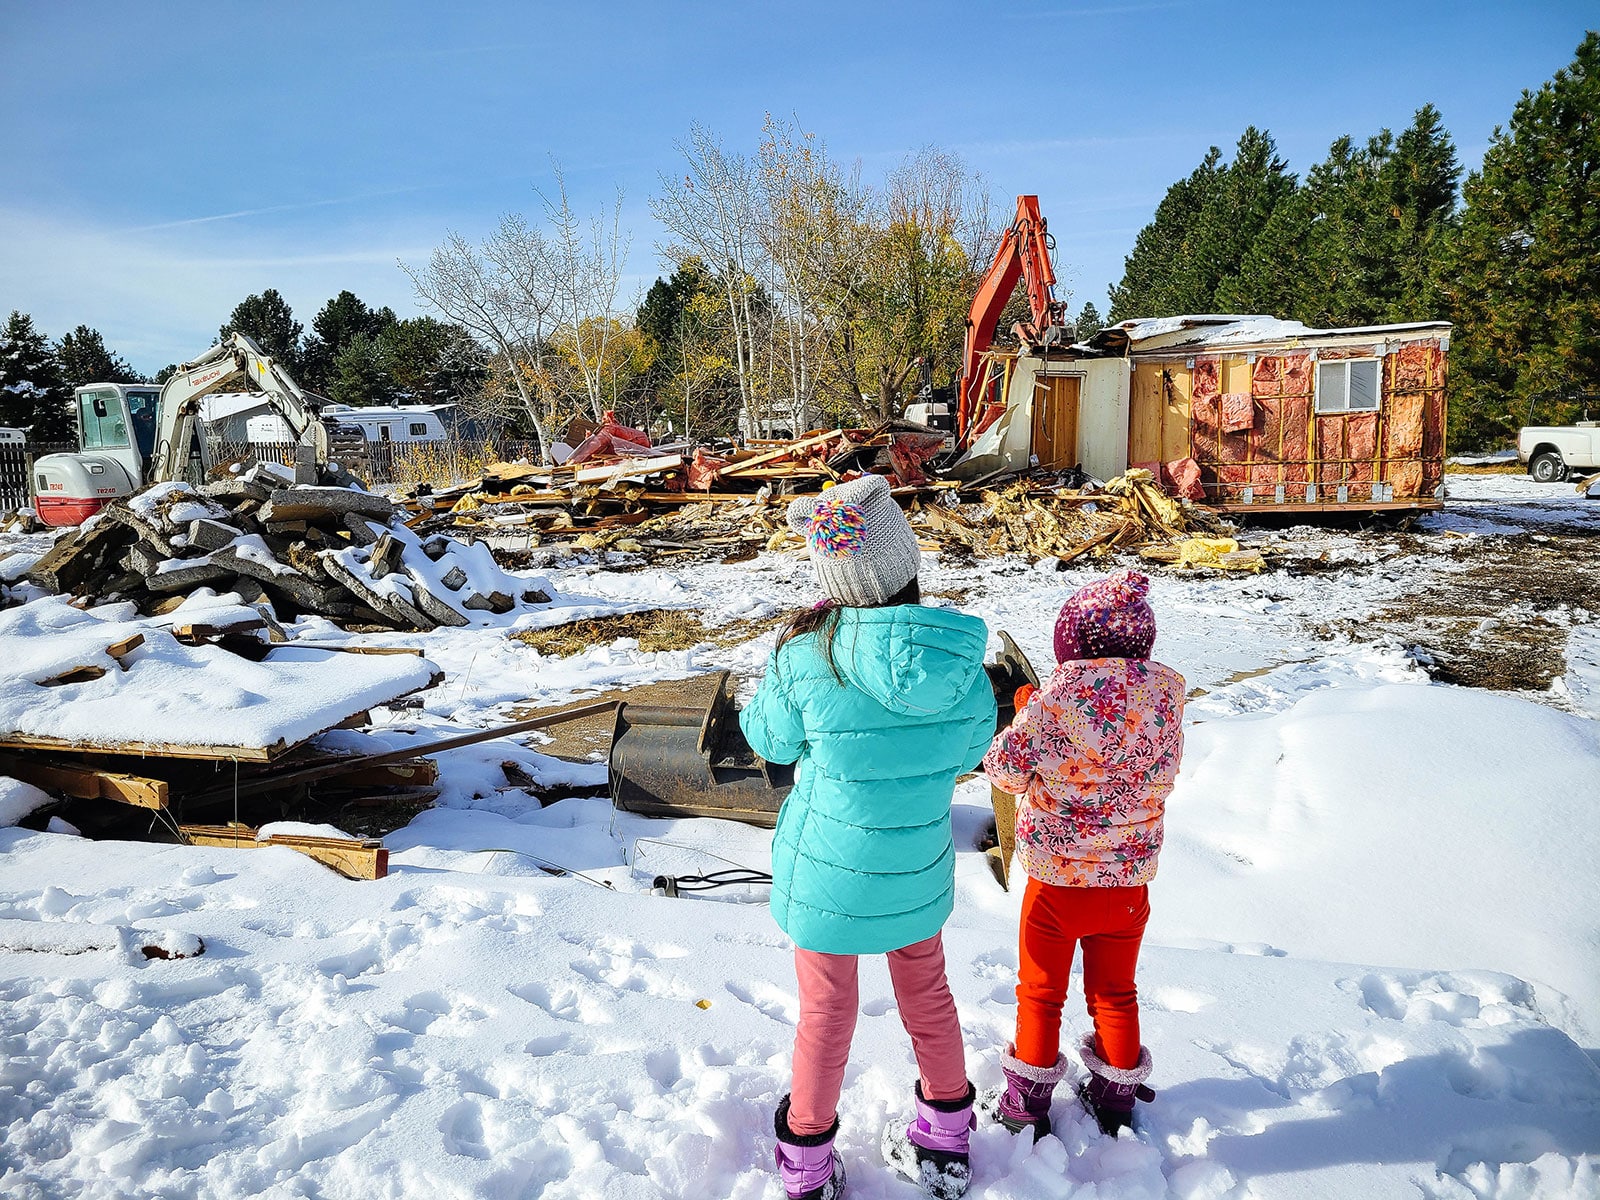 Two children watching a house get demolished by an excavator in a snowy yard